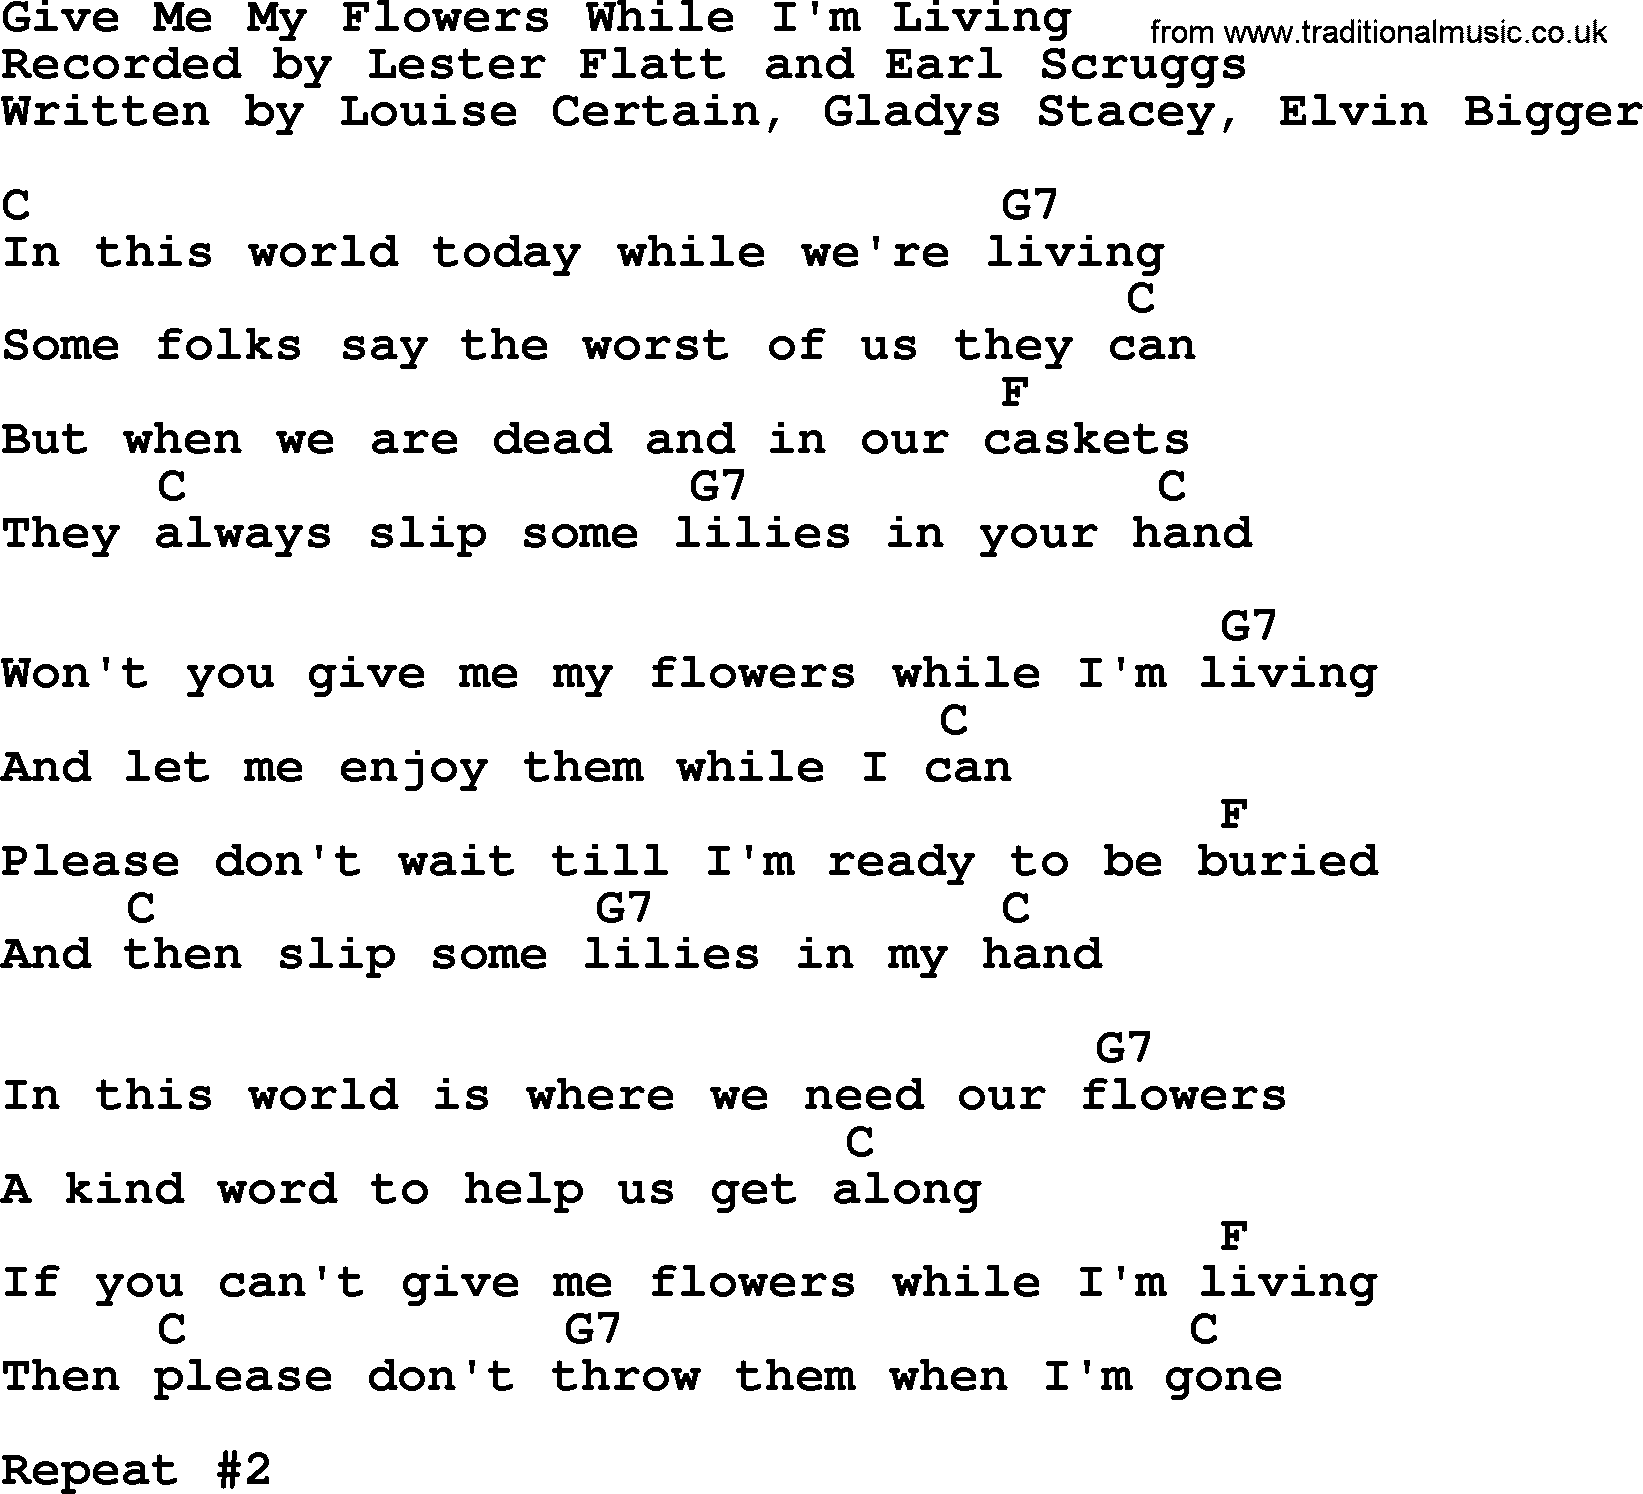 Bluegrass song: Give Me My Flowers While I'm Living, lyrics and chords